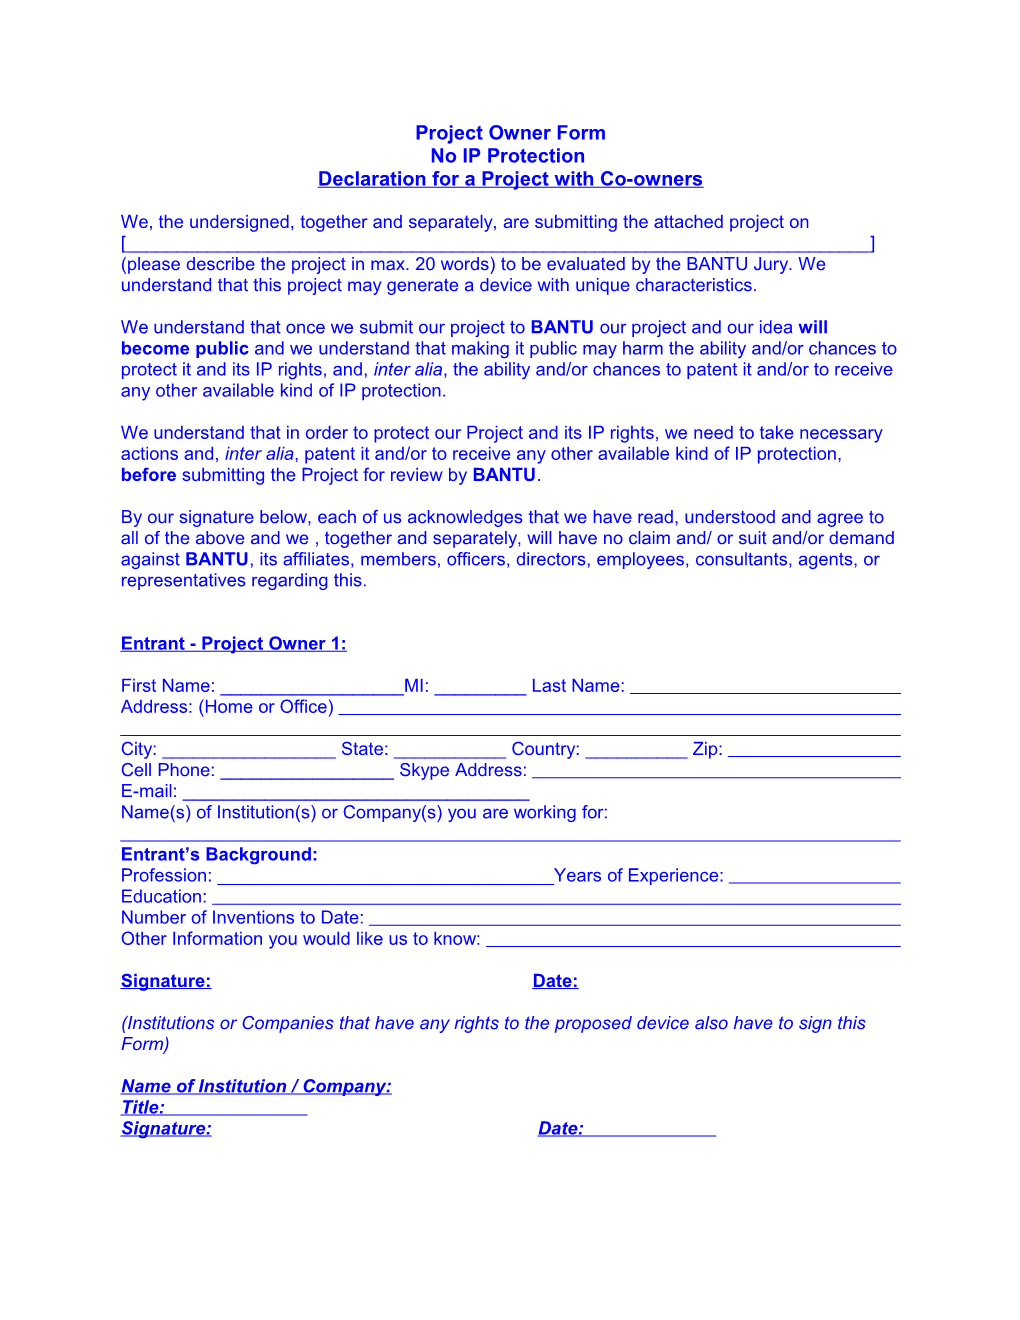 Project Owner Form